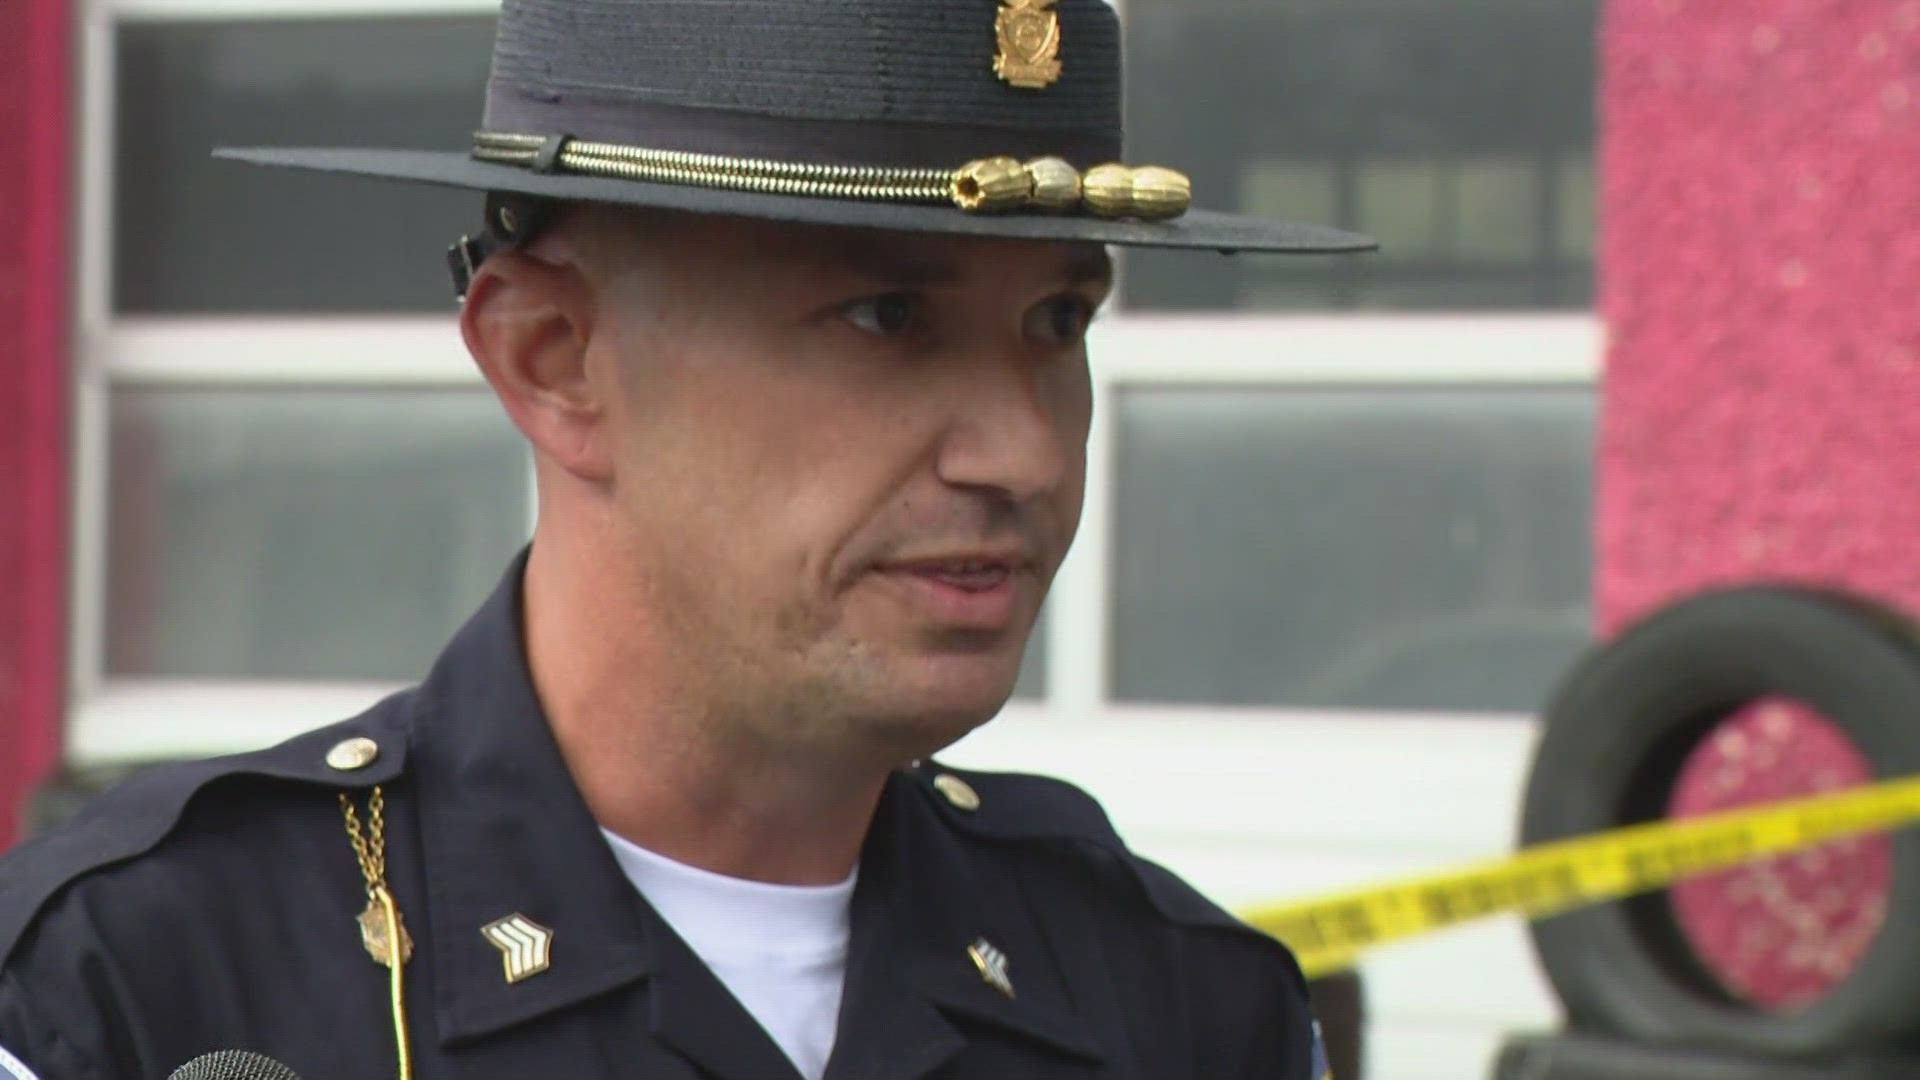 State police say two IMPD officers and a state trooper shot and killed an armed man on the north side of Indianapolis Tuesday afternoon.